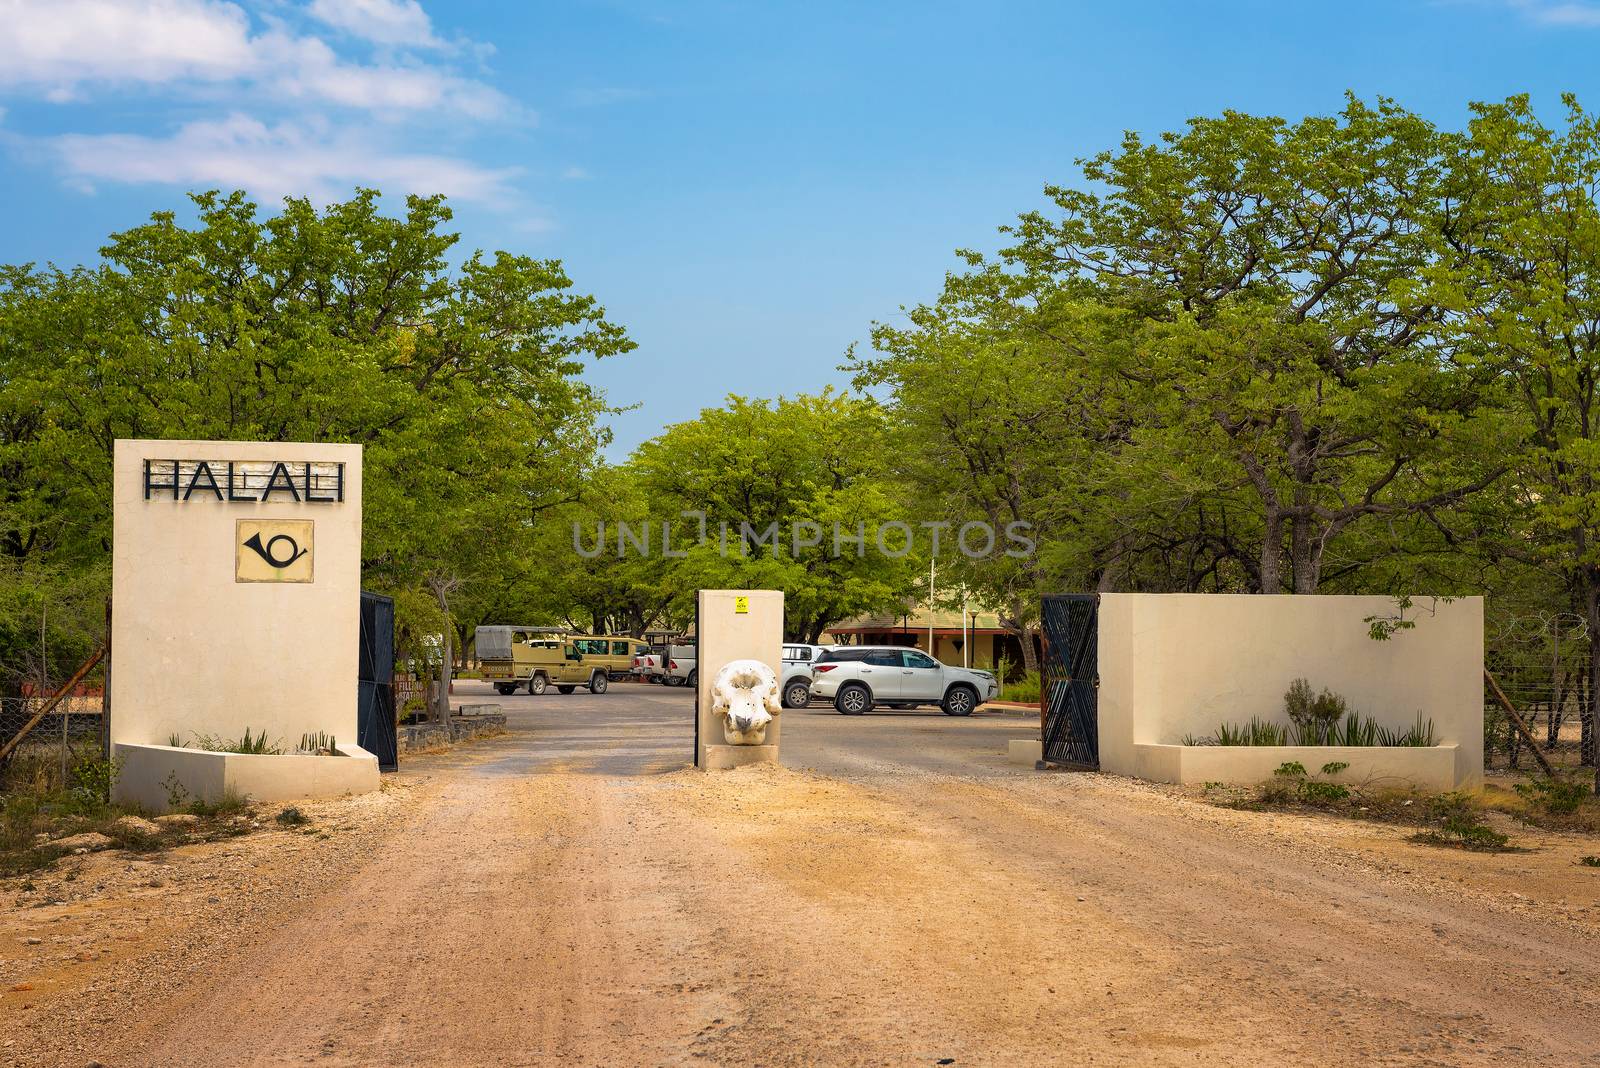 Entry gate of the Halali resort and campsite in Etosha National Park by nickfox